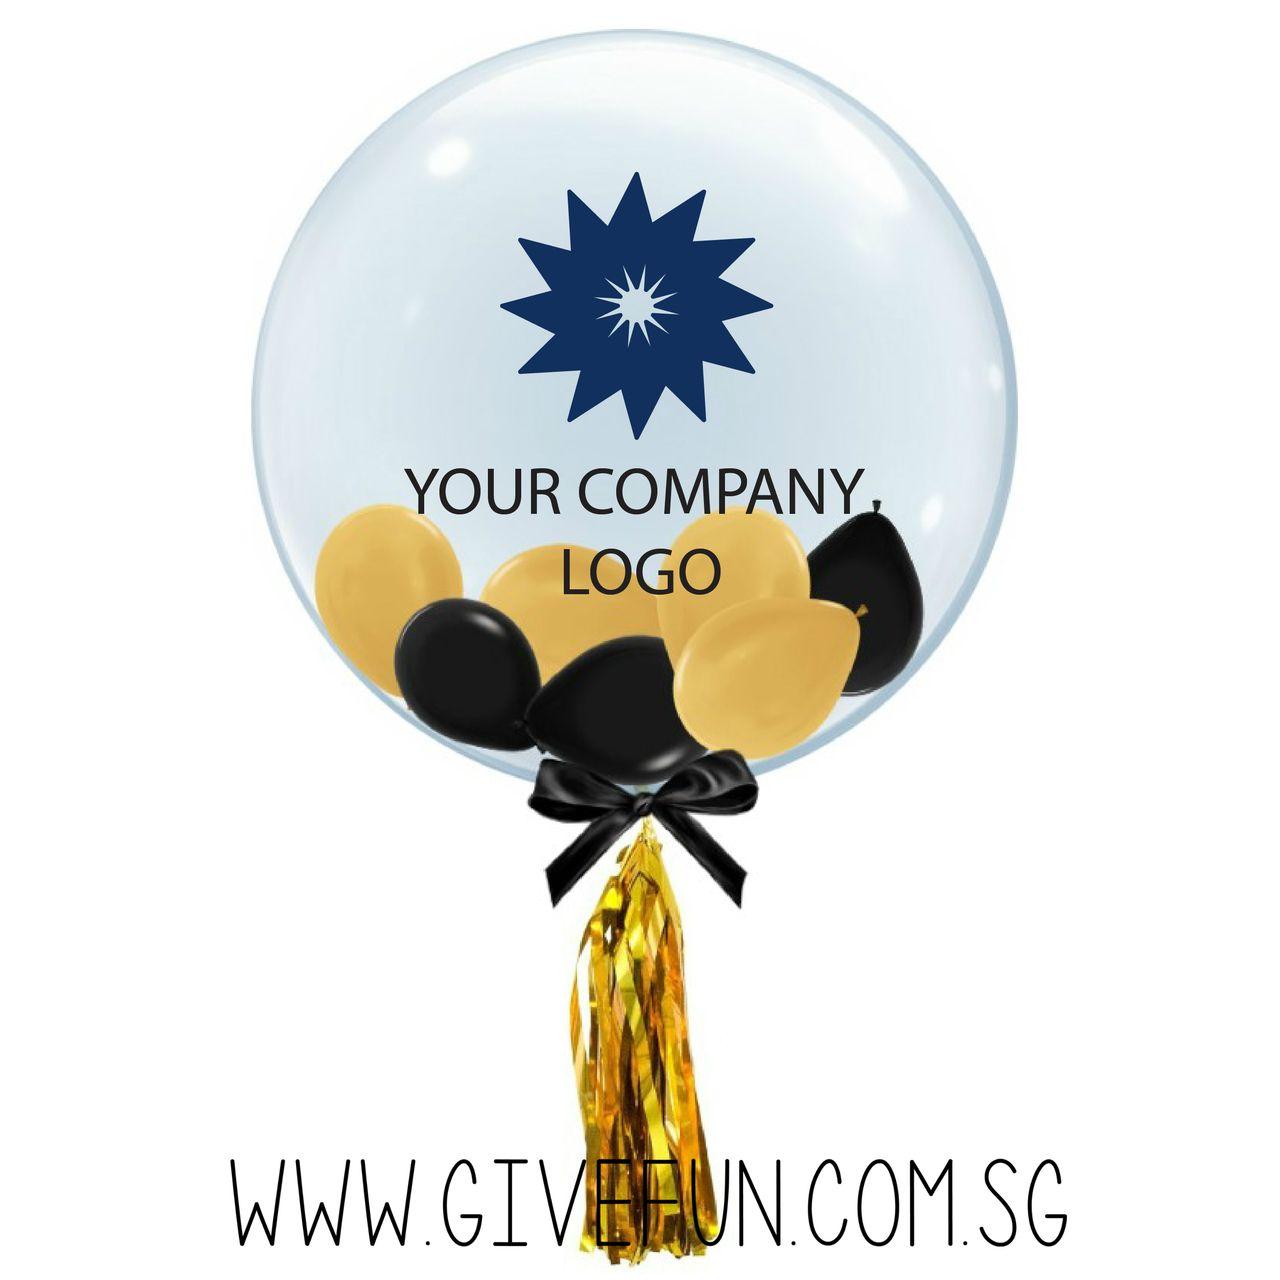 Metallic Company Logo - Personalised Crystal Clear Transparent Balloons for Company Logo